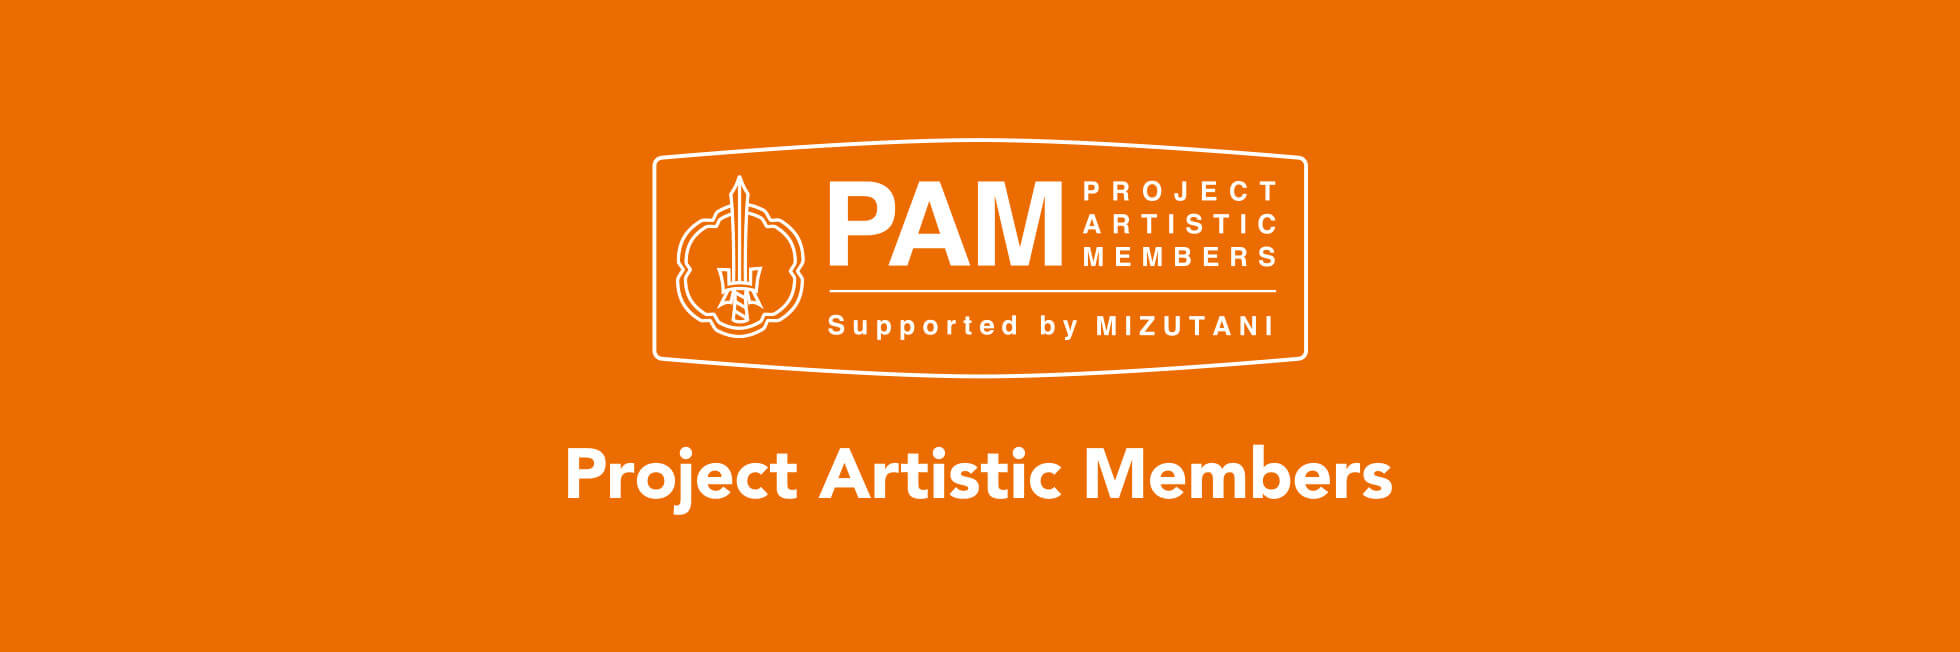 Project Artistic Members